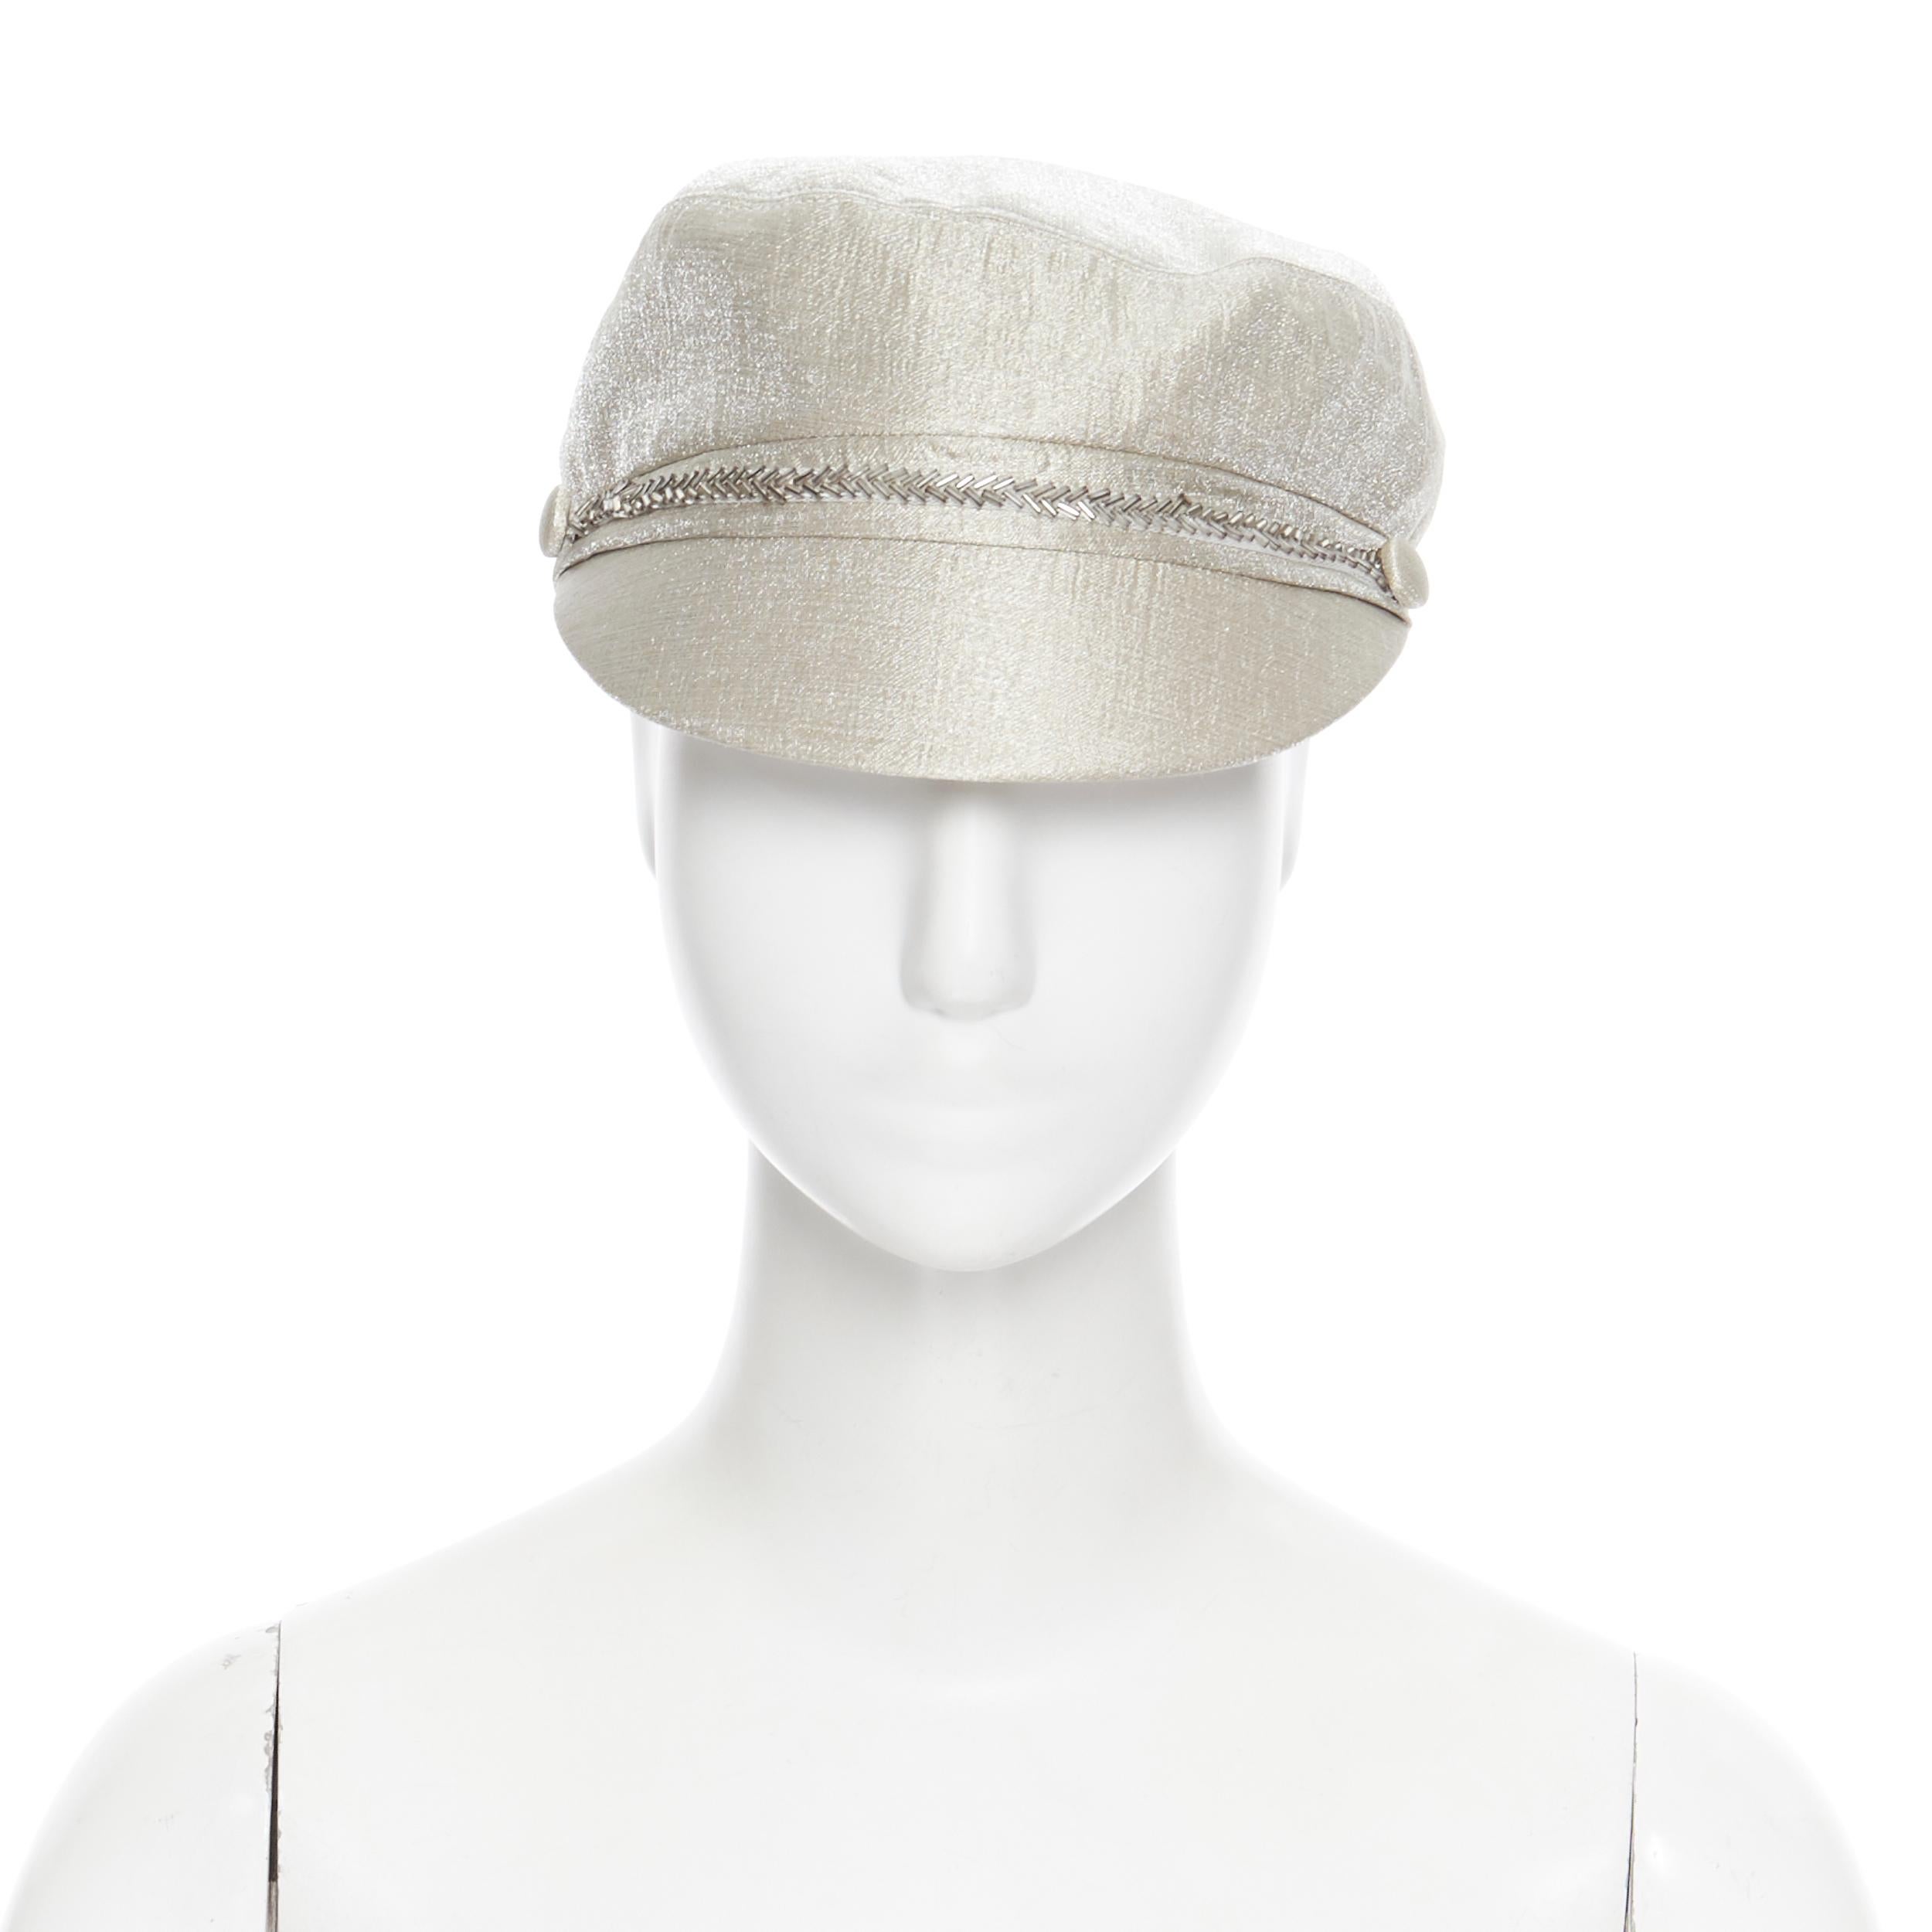 new EUGENIA KIM mint champagne silver bead embellished newsboy hat 
Brand: Eugenia Kim
Designer: Eugenia Kim
Model Name / Style: Newsboy hat
Material: Fabric
Color: Silver
Pattern: Solid
Extra Detail: Short beak. Bead embellishment.
Made in: